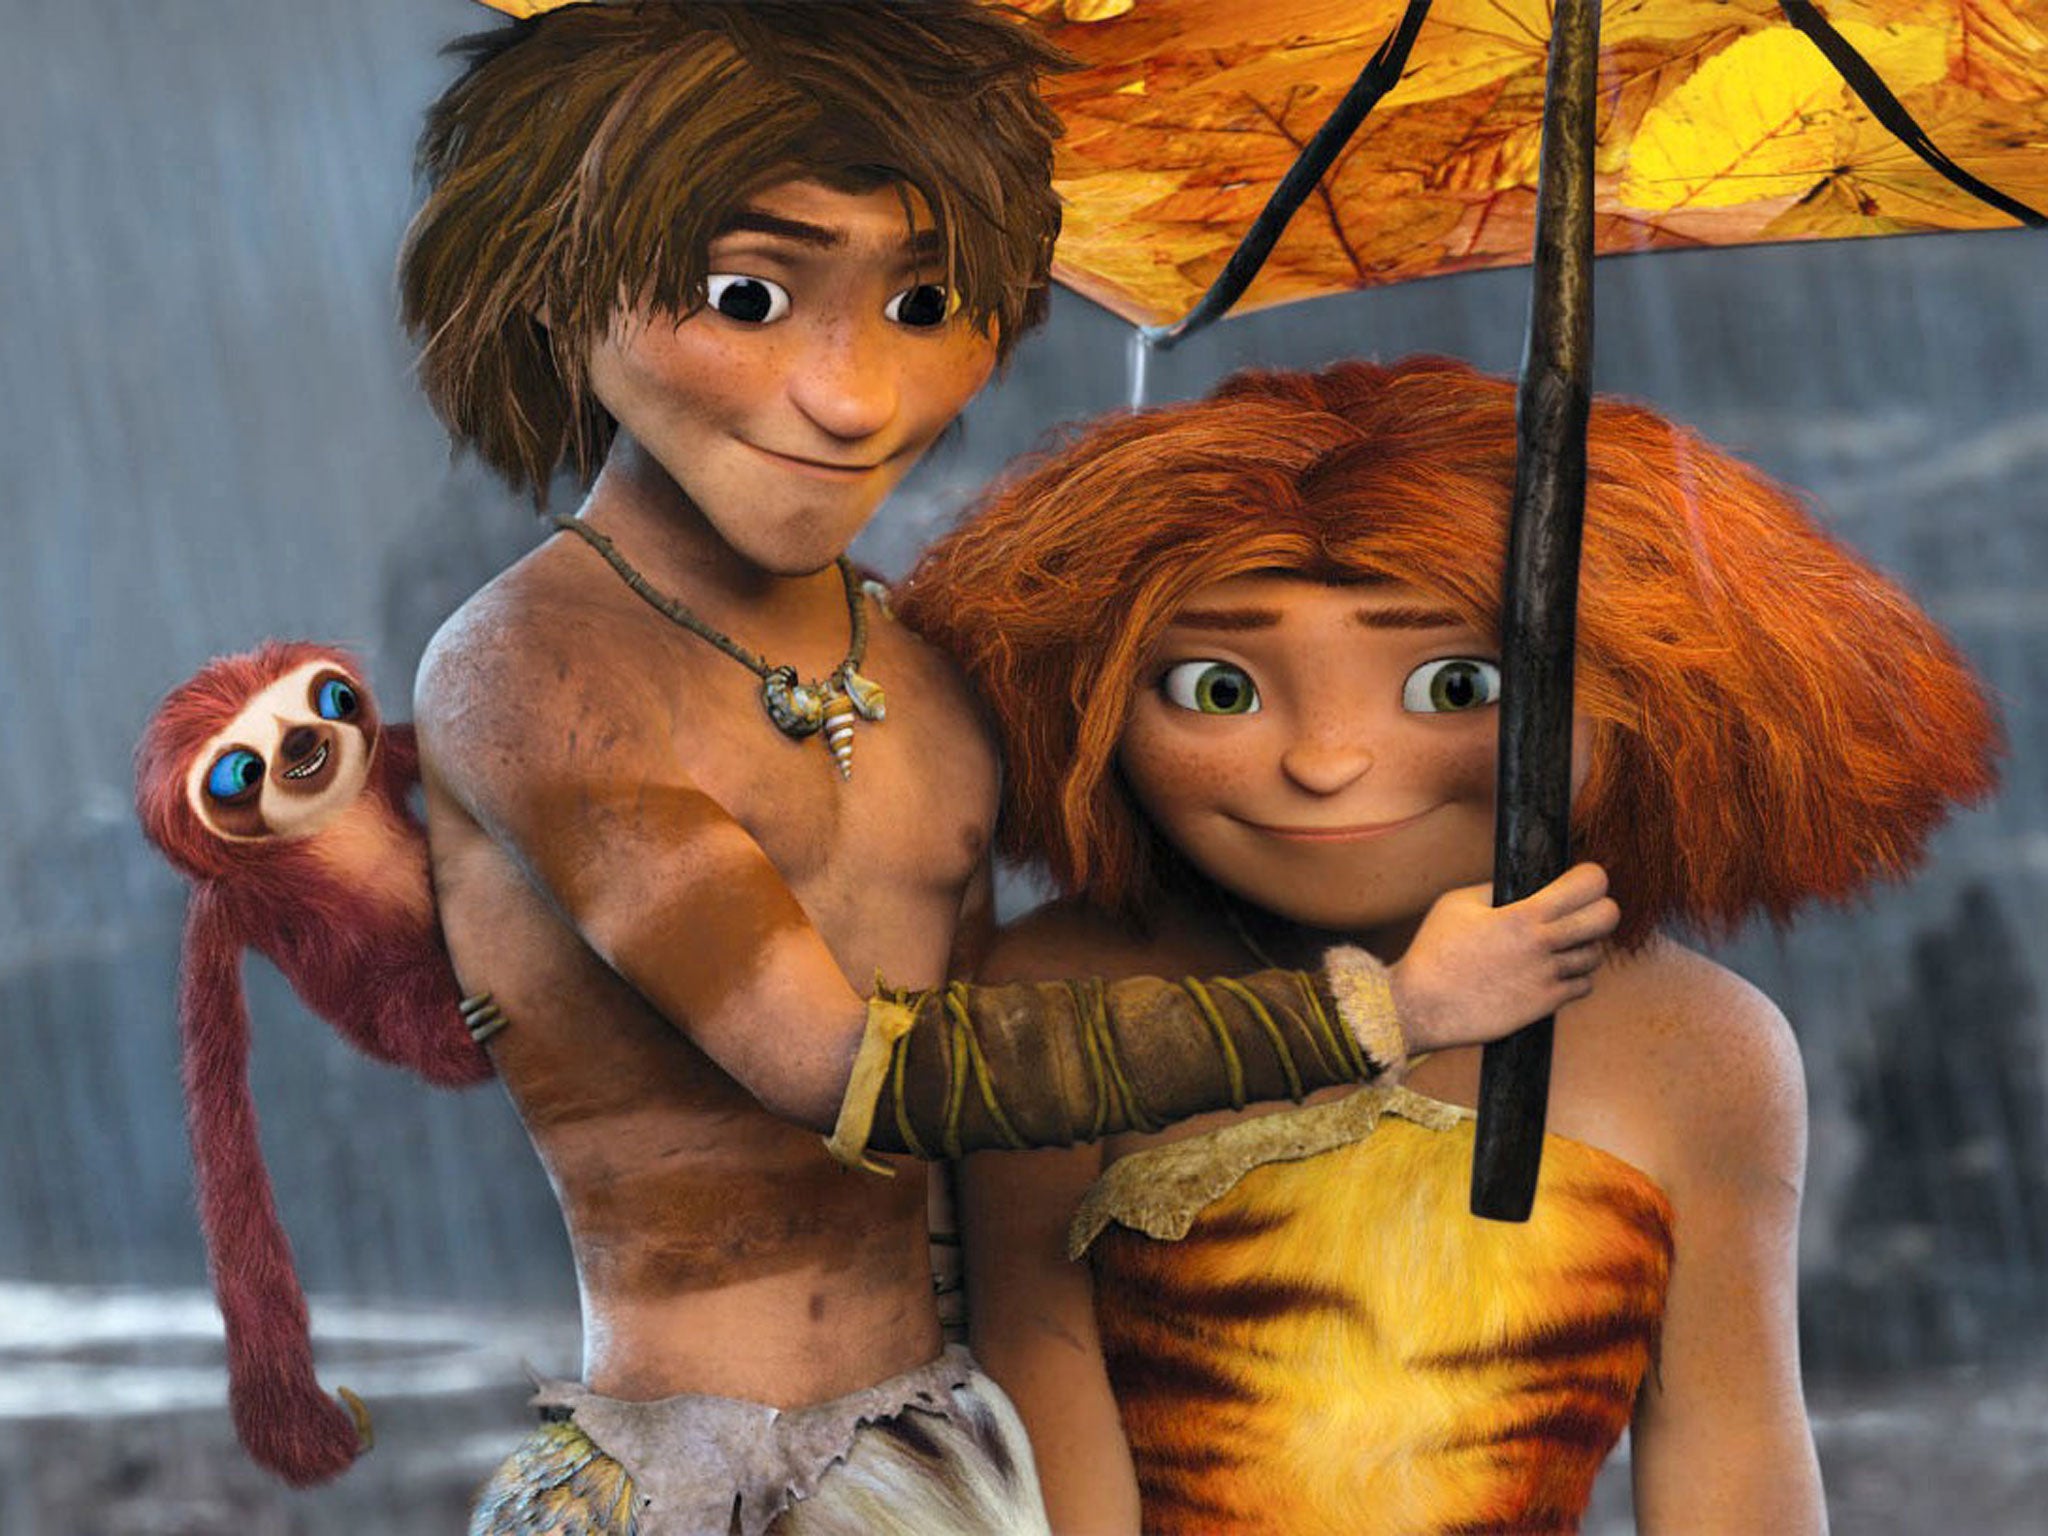 The Croods – an inspired and idiosyncratic tale with a feisty teenage heroine